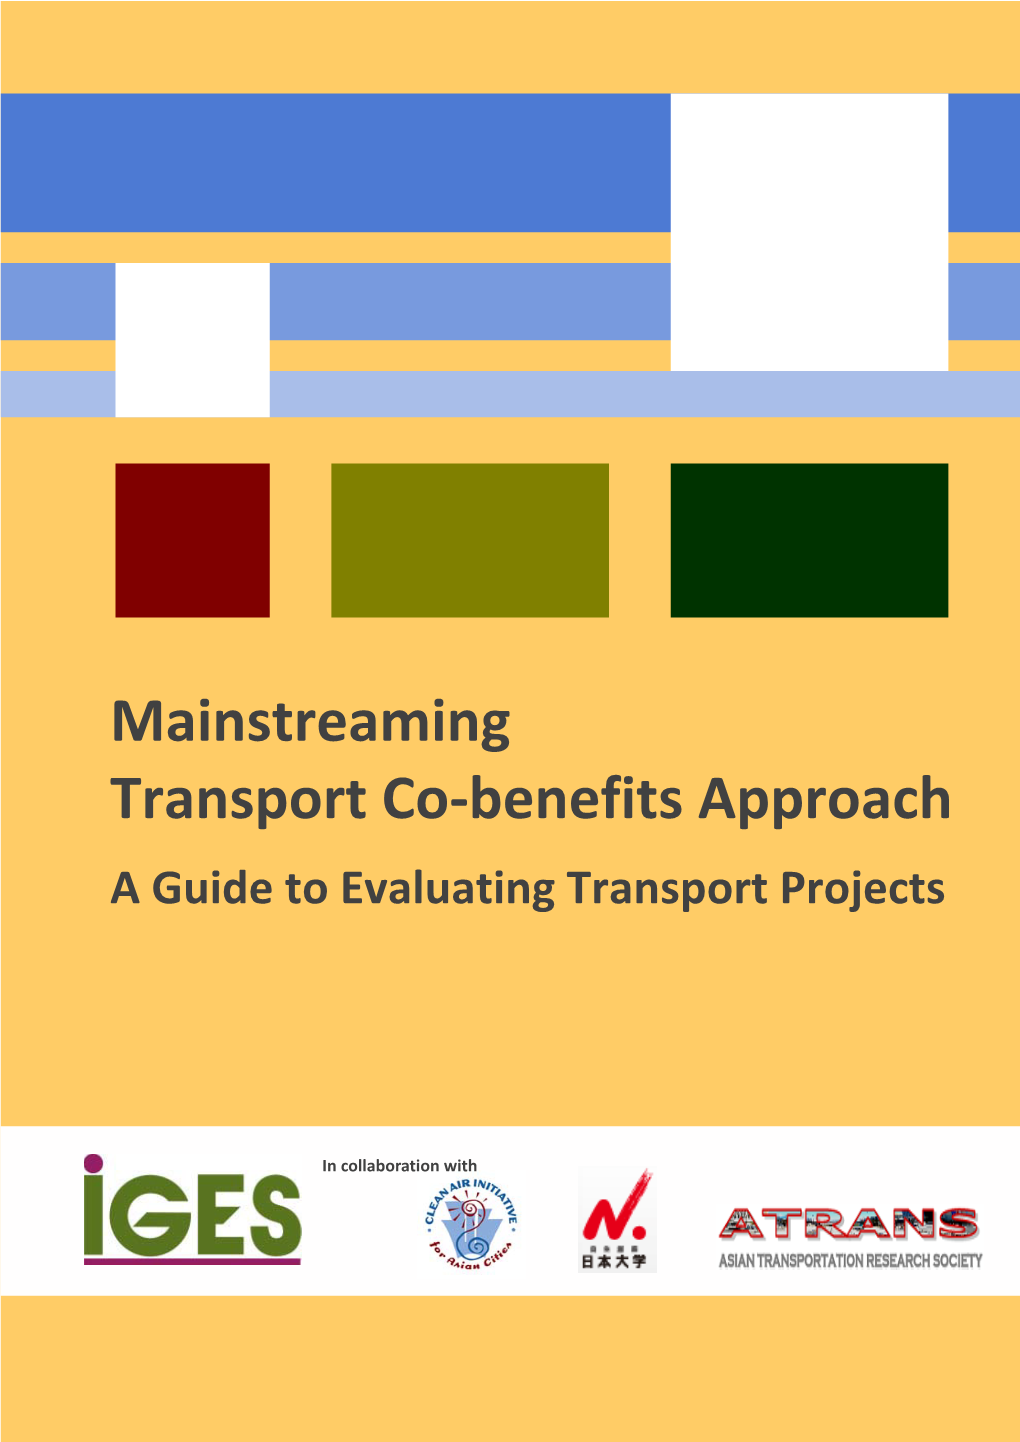 Mainstreaming Transport Co-Benefits Approach